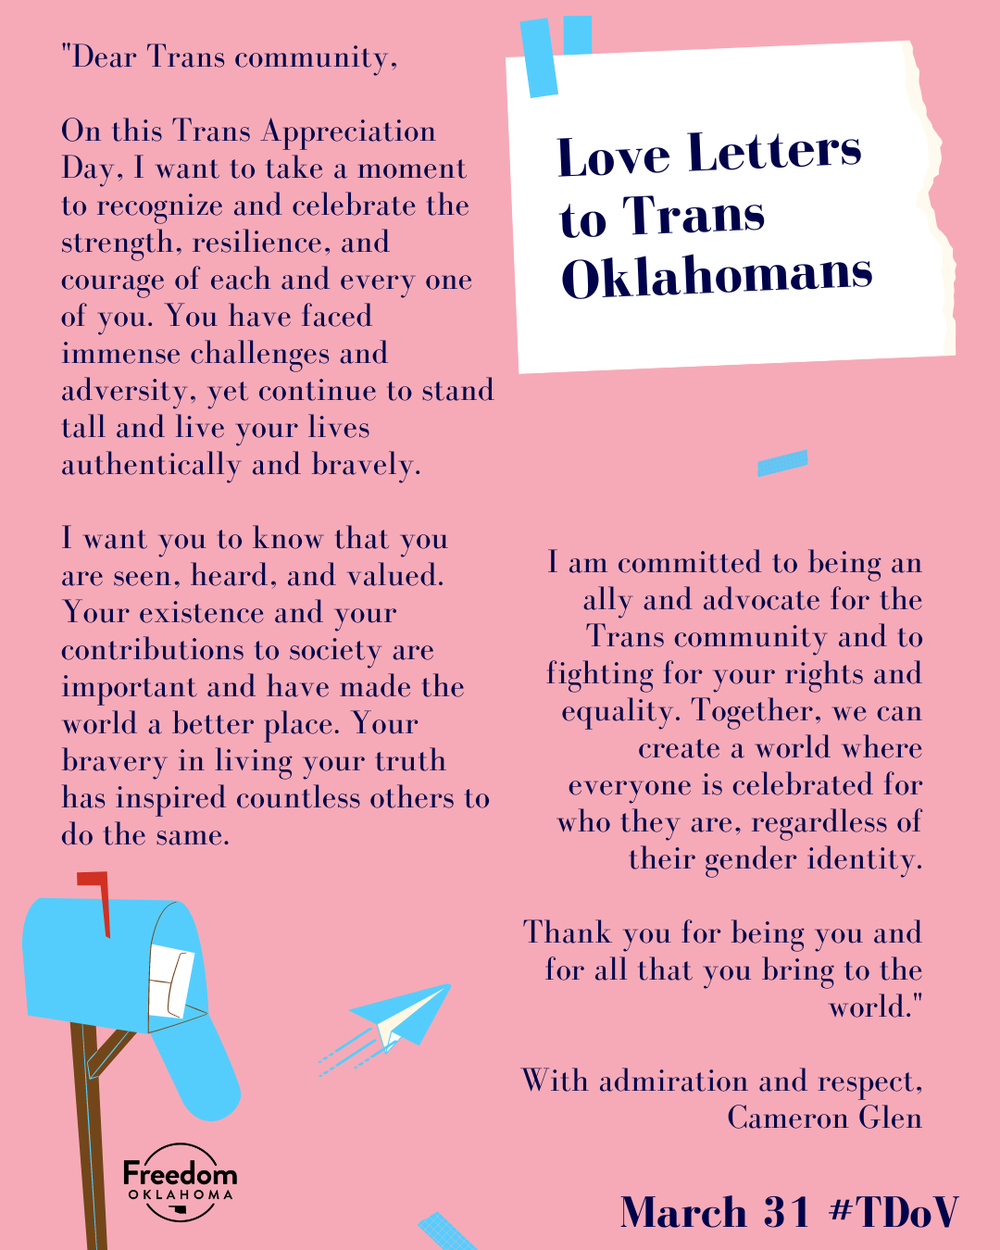  Similar pink graphic with one love letter: "Dear Trans community, On this Trans Appreciation Day, I want to take a moment to recognize and celebrate the strength, resilience, and courage of each and every one of you. You have faced immense challenge